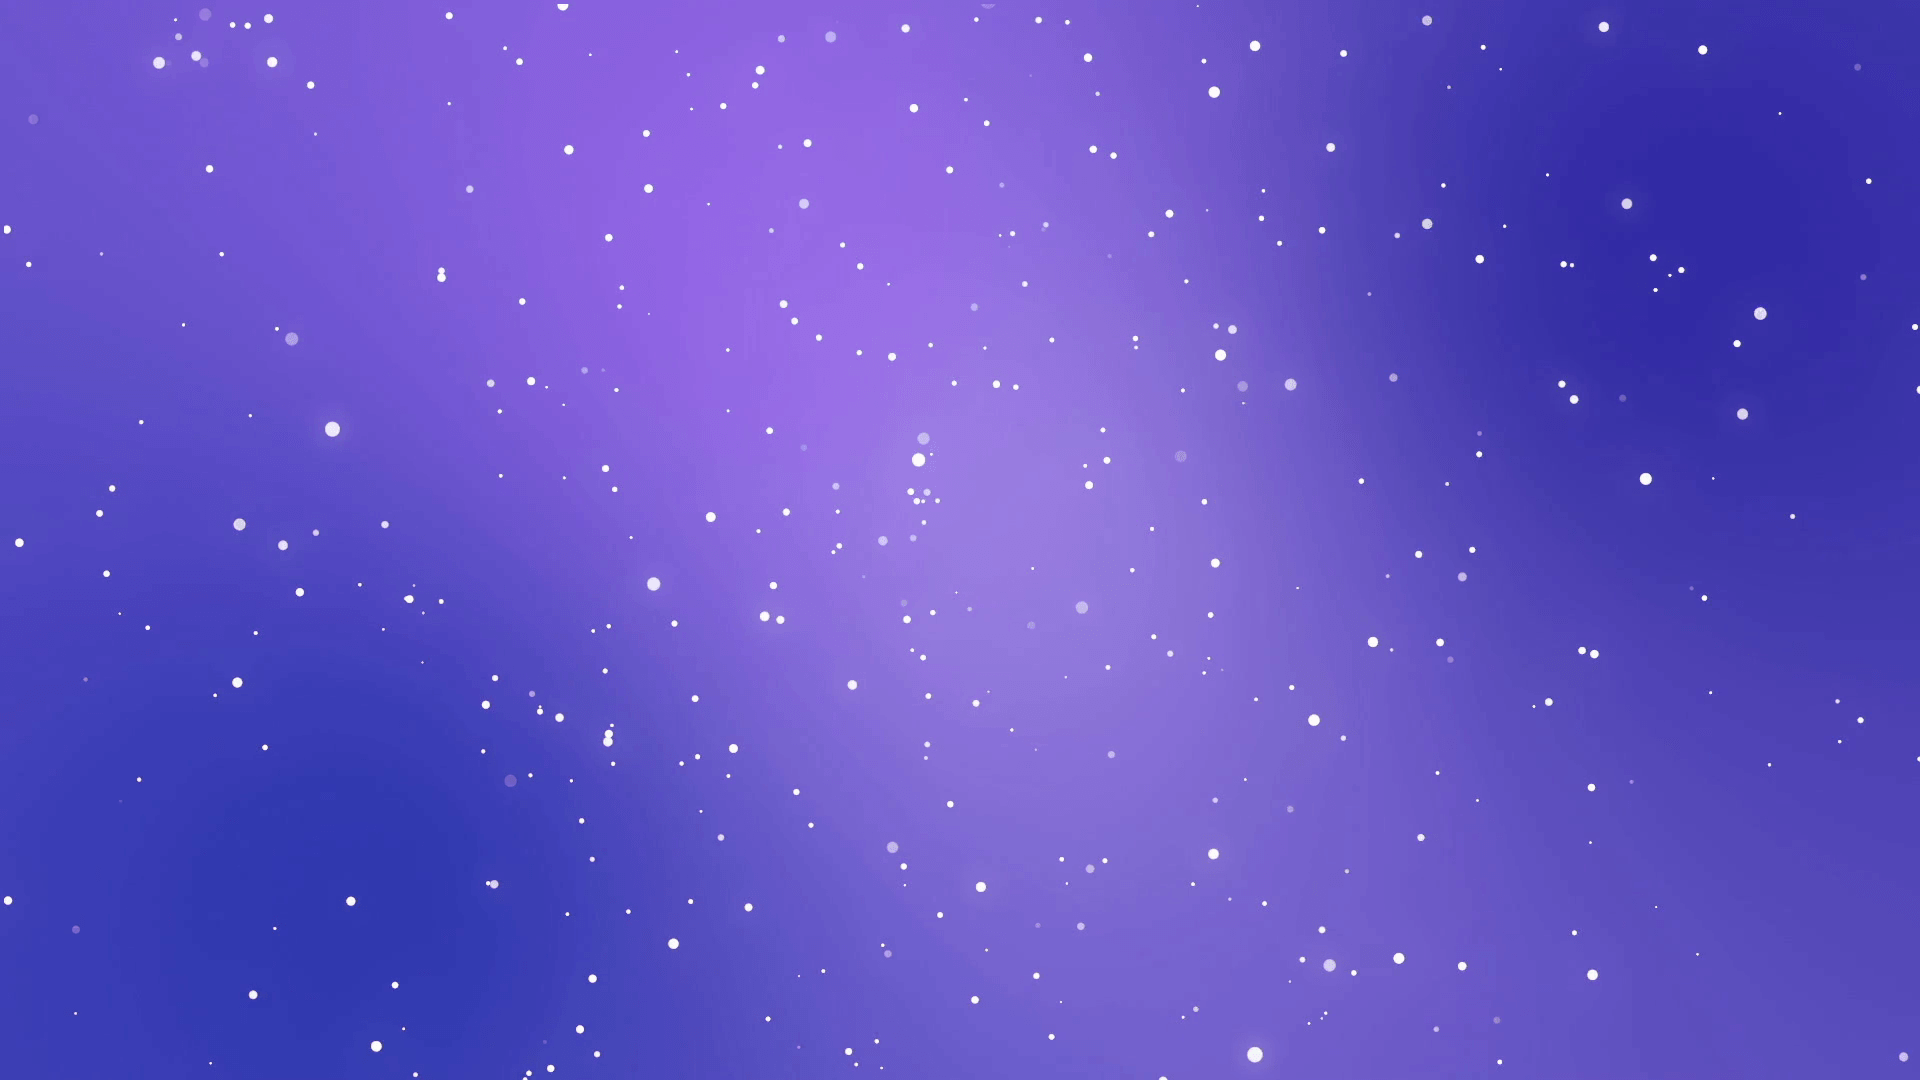 Starry night sky animation with light particles flickering on purple